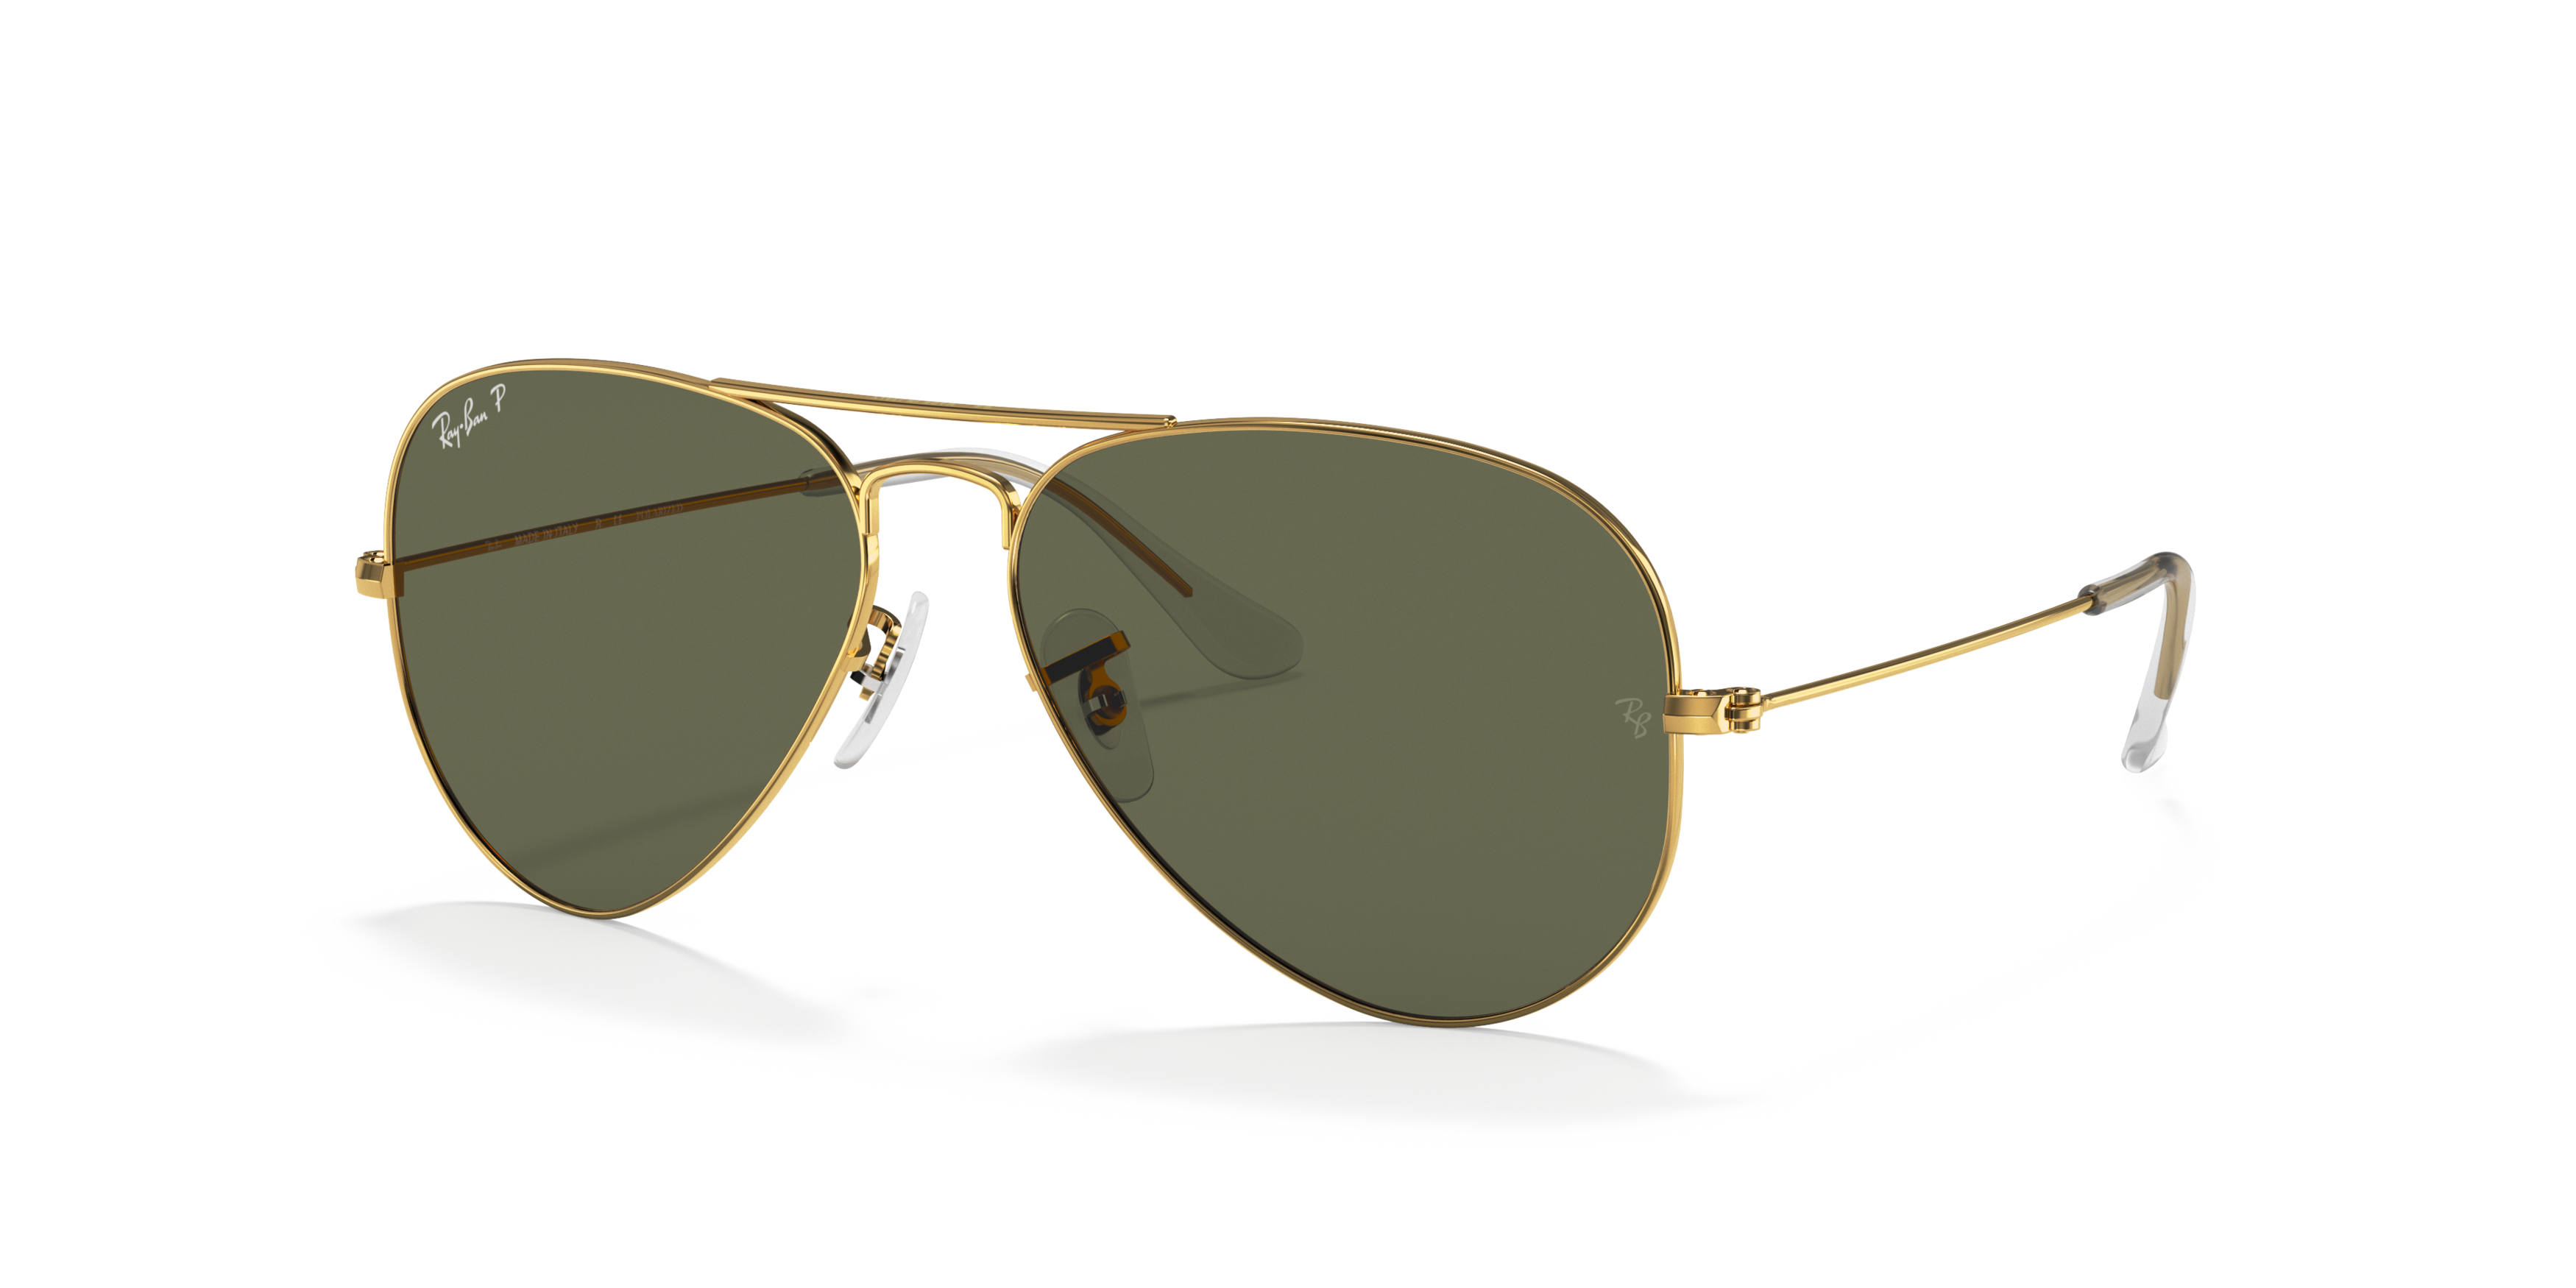 Angle_Left01 Ray-Ban RB 3025 Sunglasses Blue / Gold